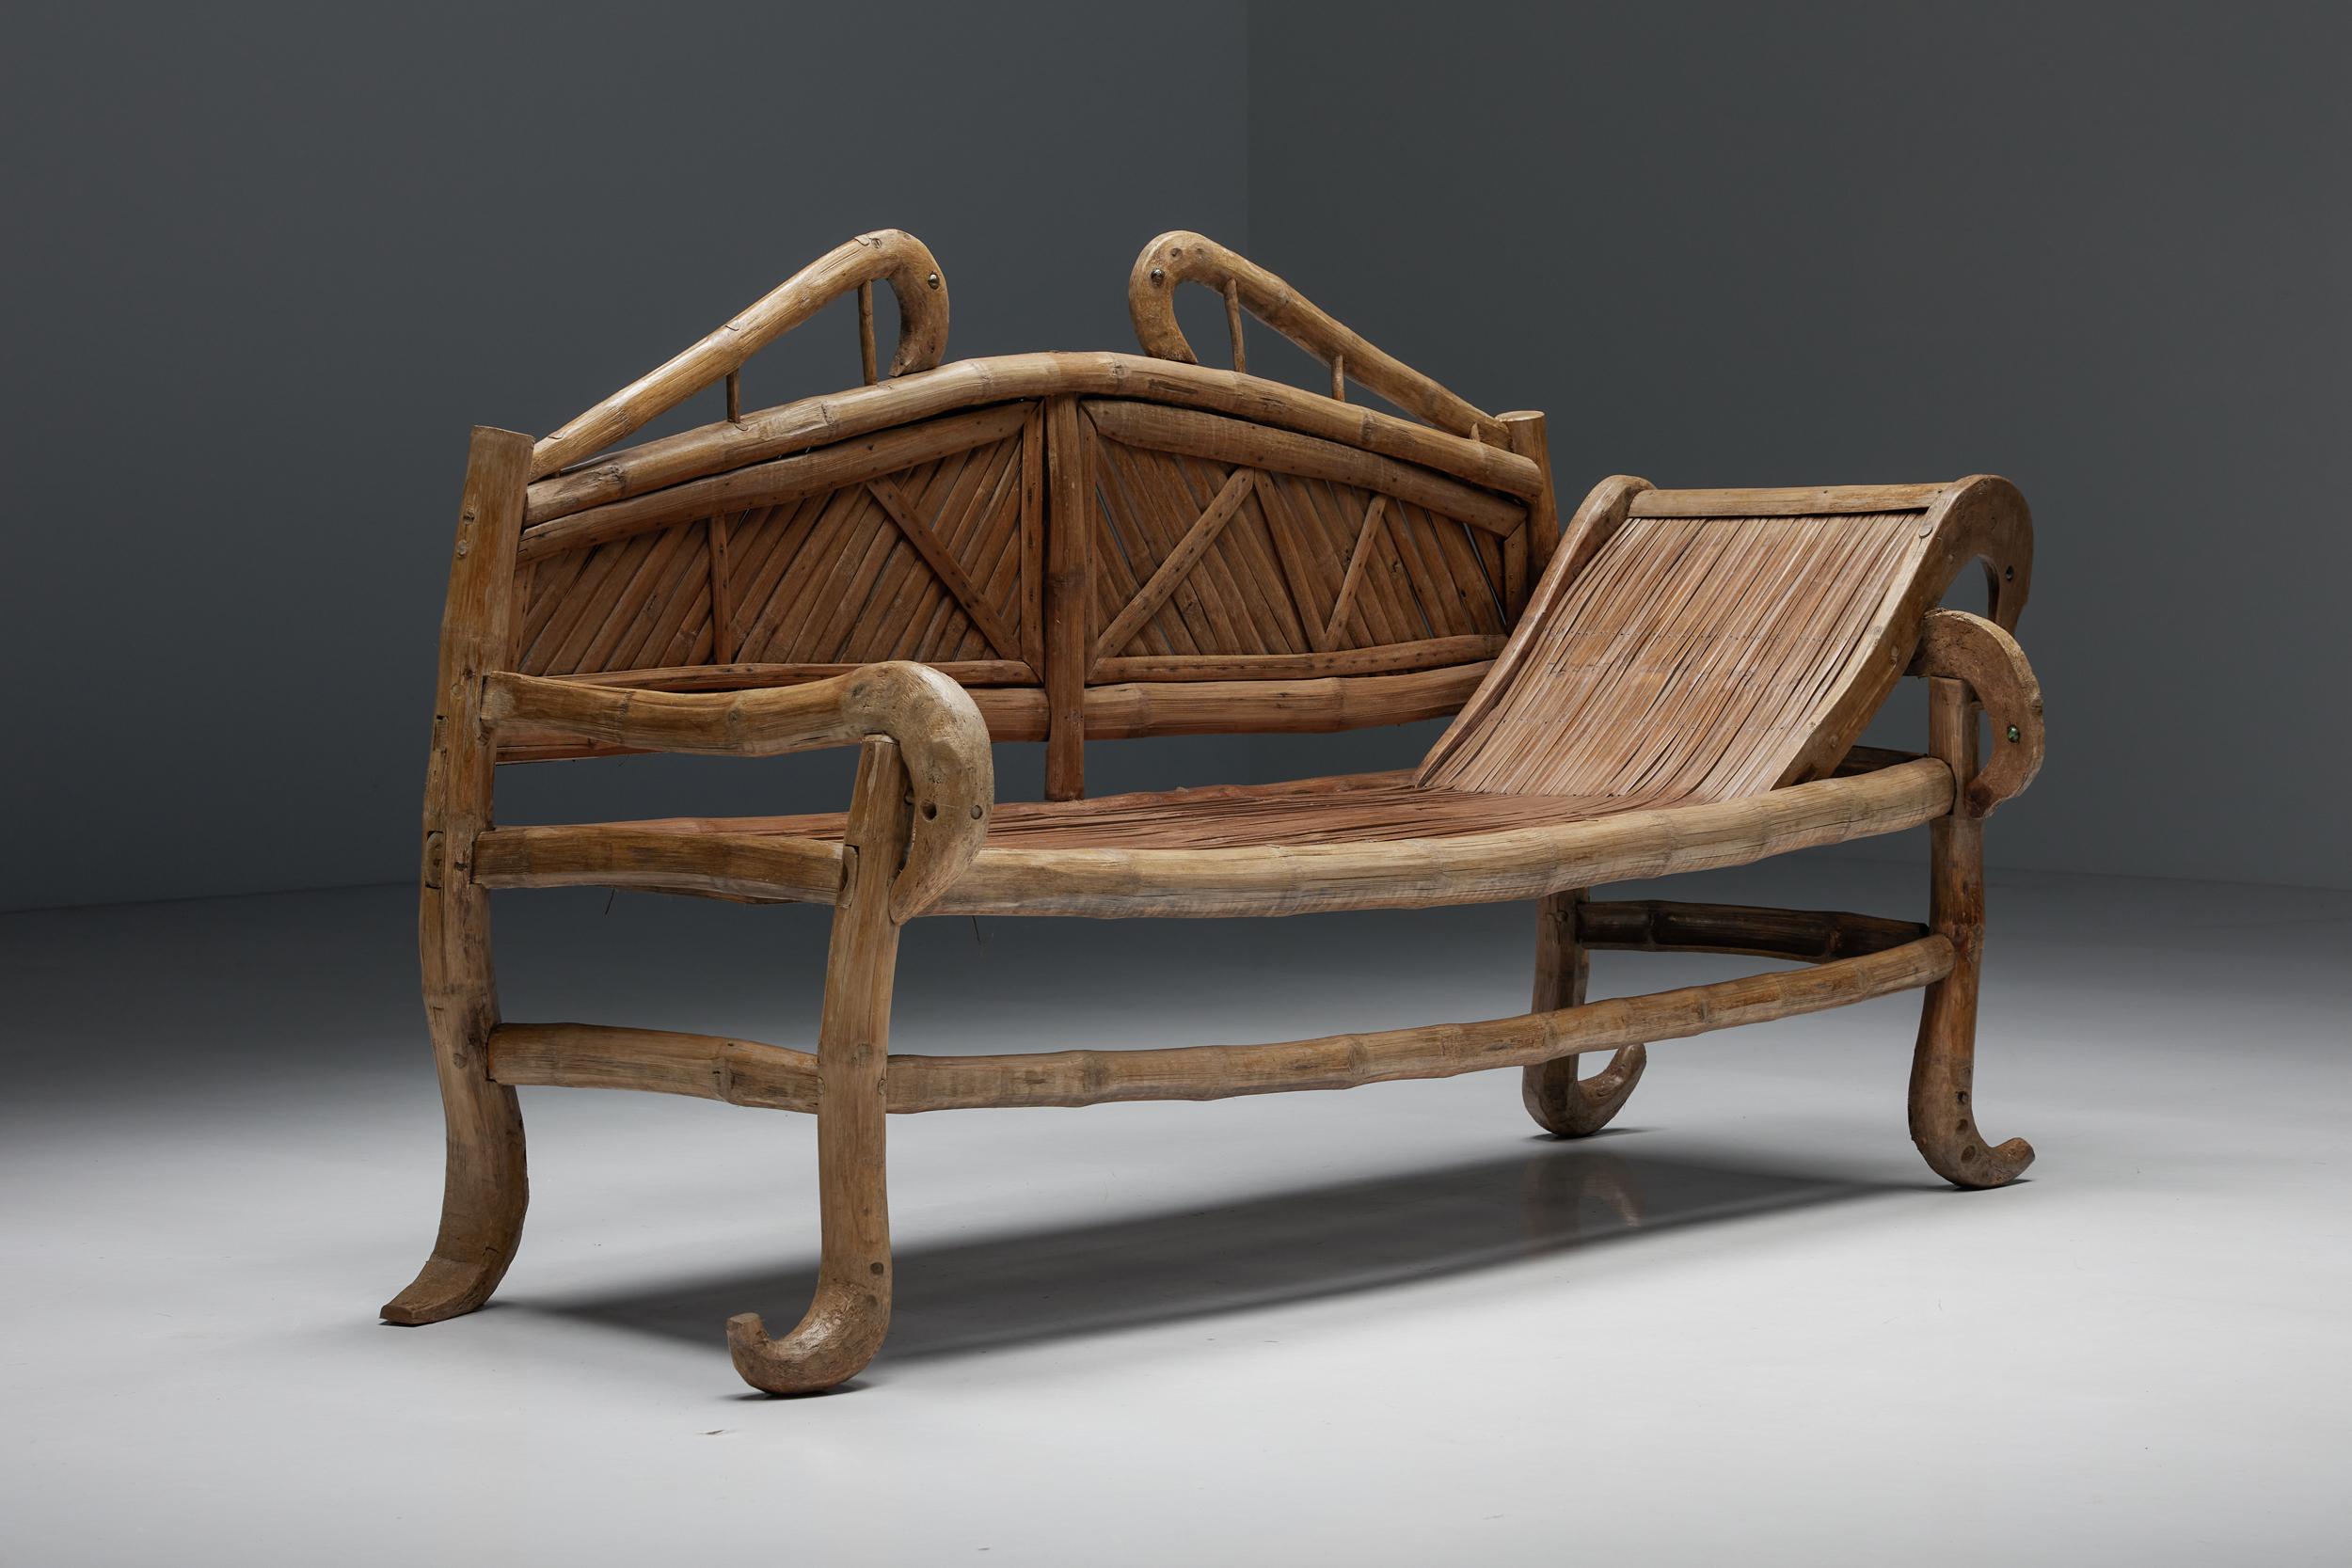 Oriental; bamboo; sofa-bed; daybed; 20th century; Bohemian; French; organic; curved; bench;

A 20th-century oriental daybed made of bamboo, raised on four organic legs ending in a curled foot and connected by three spacer bars. The backrest is